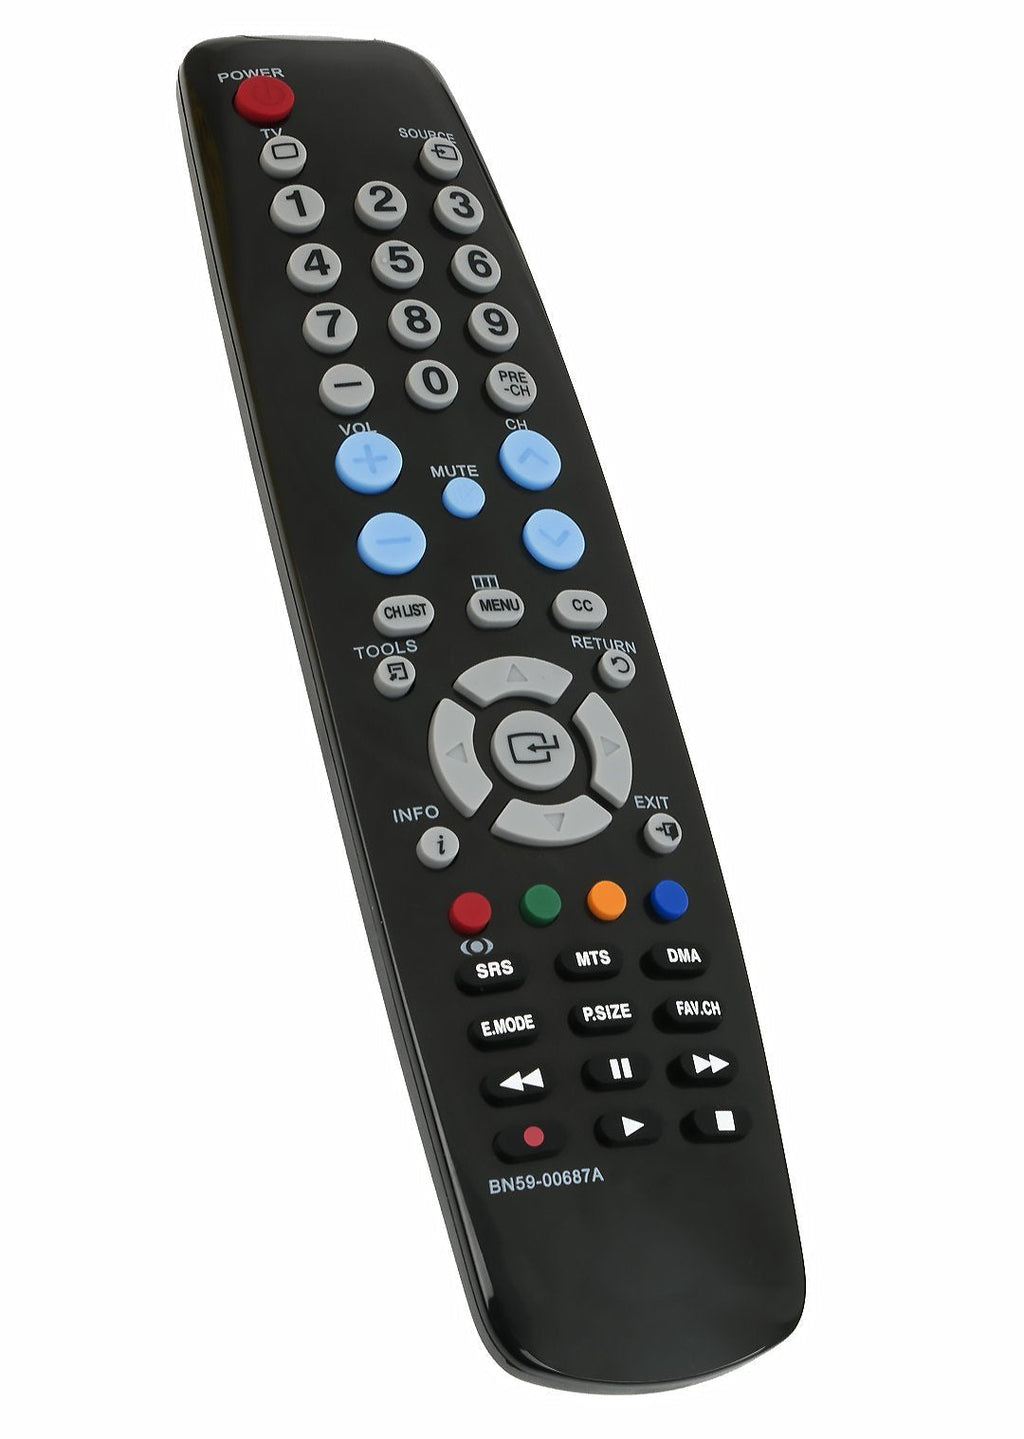 New BN59-00687A Replace Remote fit for Samsung TV LN40A450C1DXZA LN40A450 LN40A450C1 LN40A450C1D LN26A450 LN26A450C1 LN26A450C1D LN26A450C1DXZA LN32A450C1 LN32A450C1D LN37A450 LN37A450C1 - LeoForward Australia